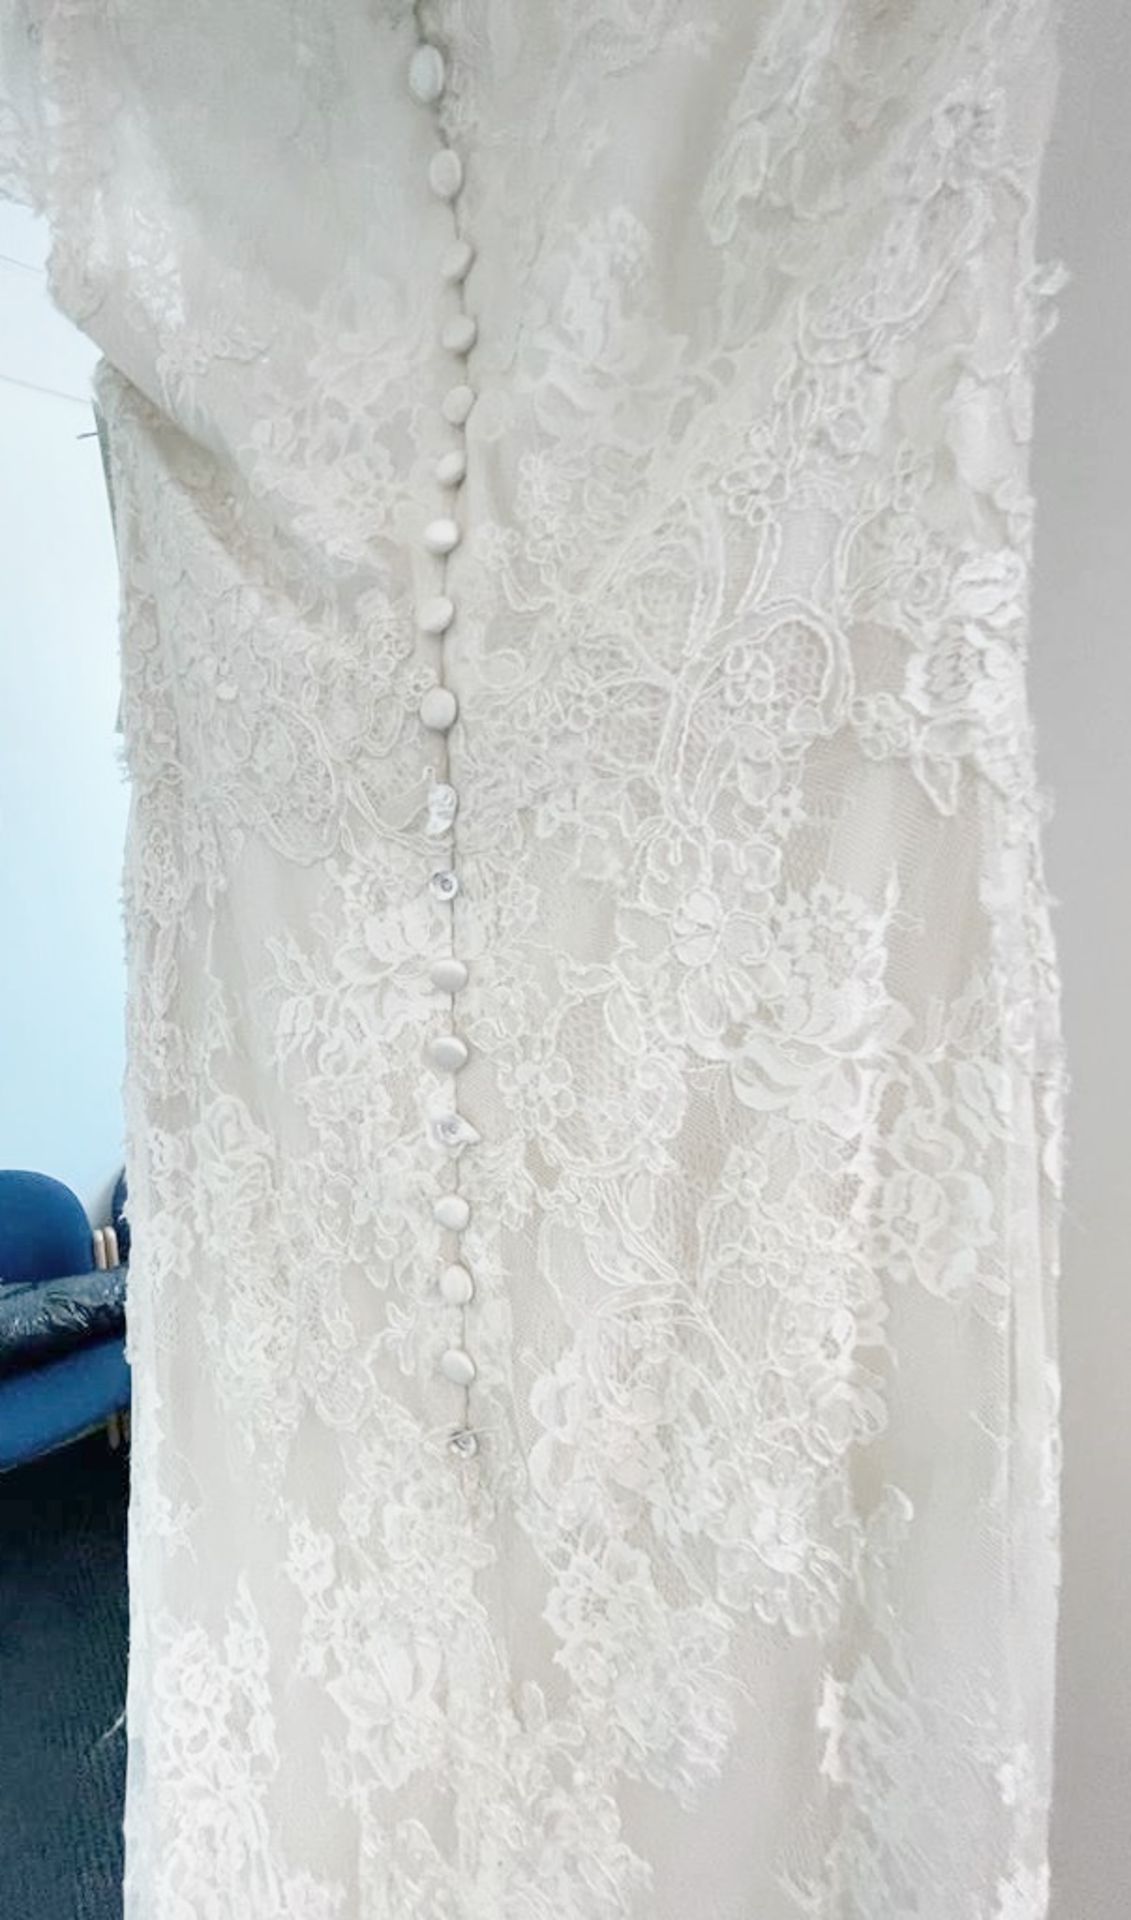 1 x LUSAN MANDONGUS 'Tabia' Fishtail Designer Wedding Dress Bridal Gown, With Chantilly Lace - Image 11 of 15